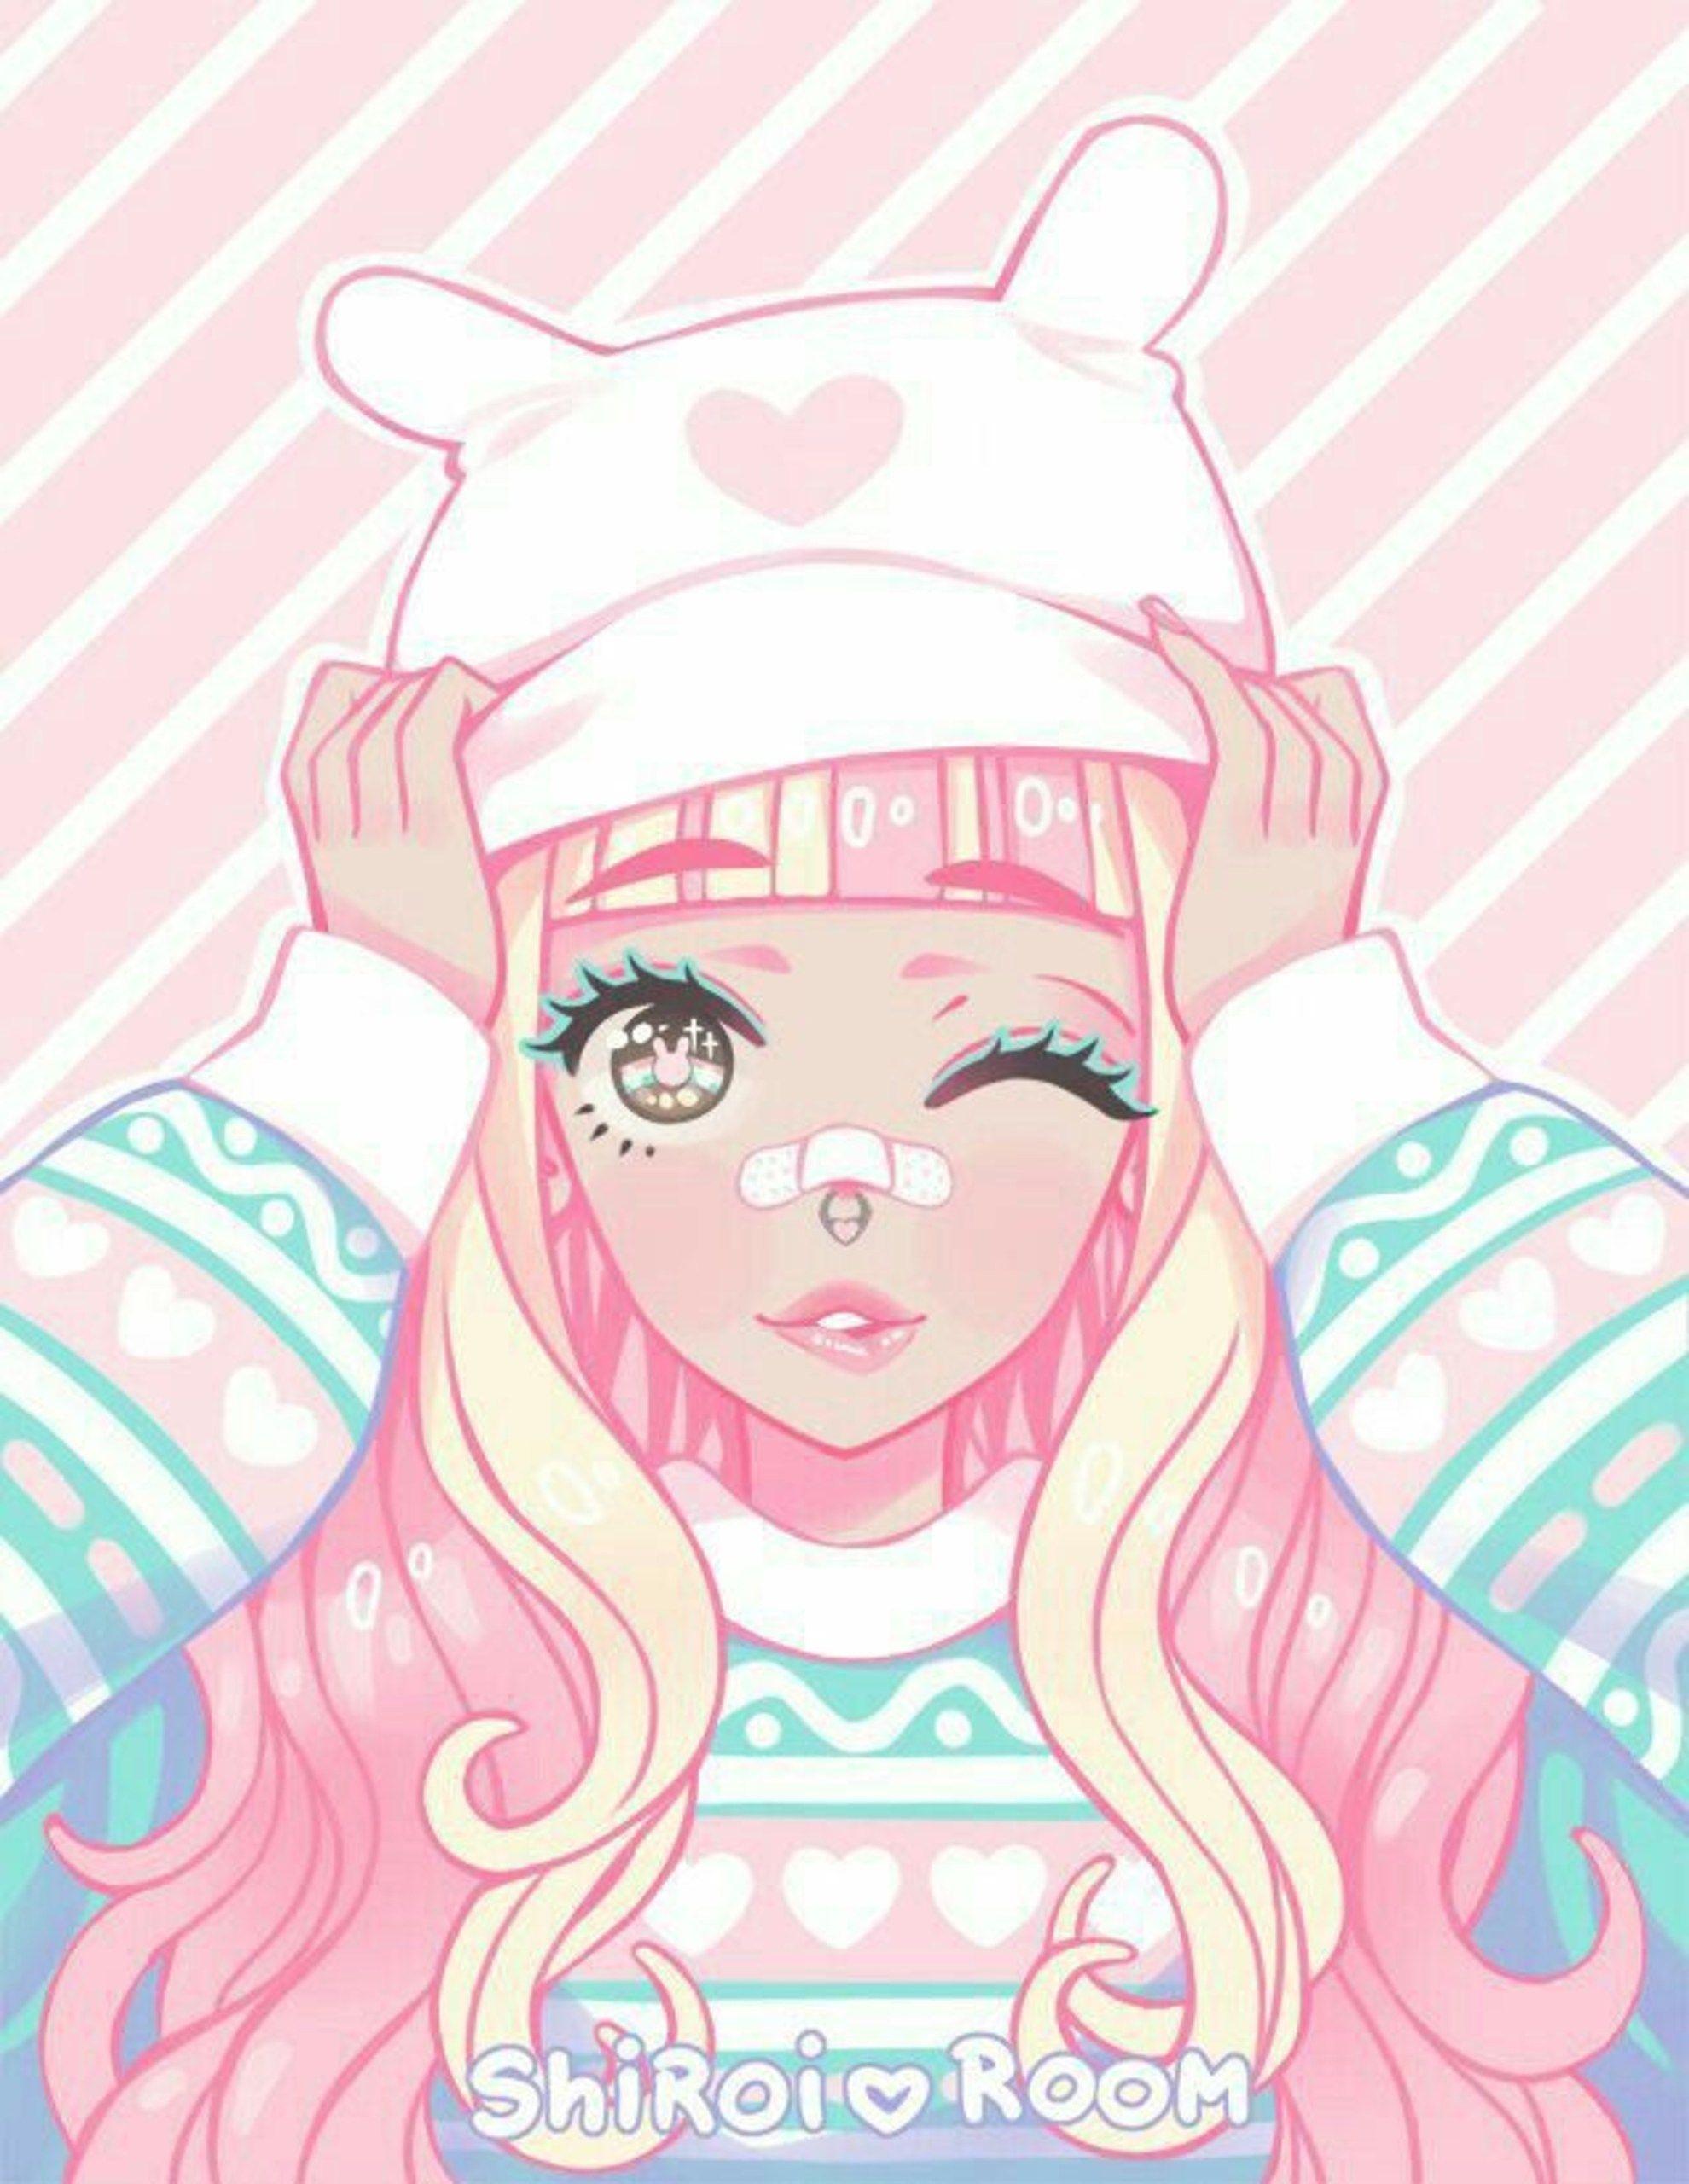 Anime girl with pastel outfit and background, adorable pfp trendy